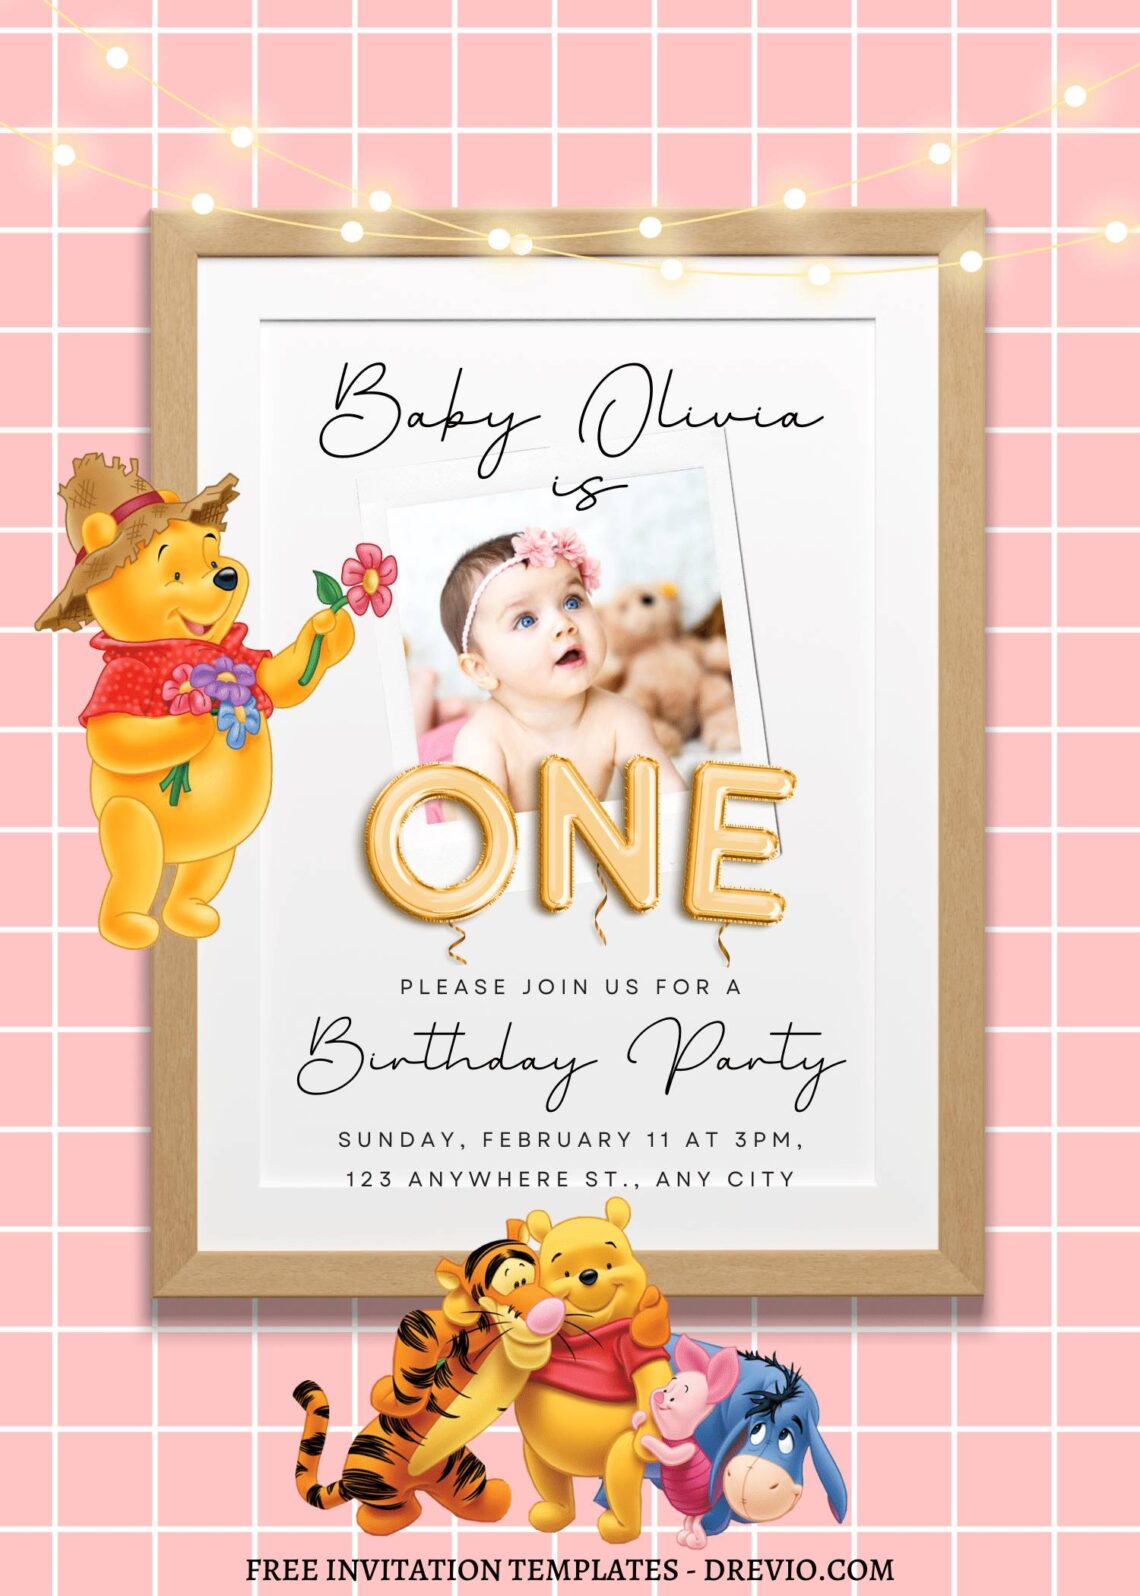 10+ Picnic Rush With Winnie The Pooh Canva Birthday Invitation Templates with cute piglet